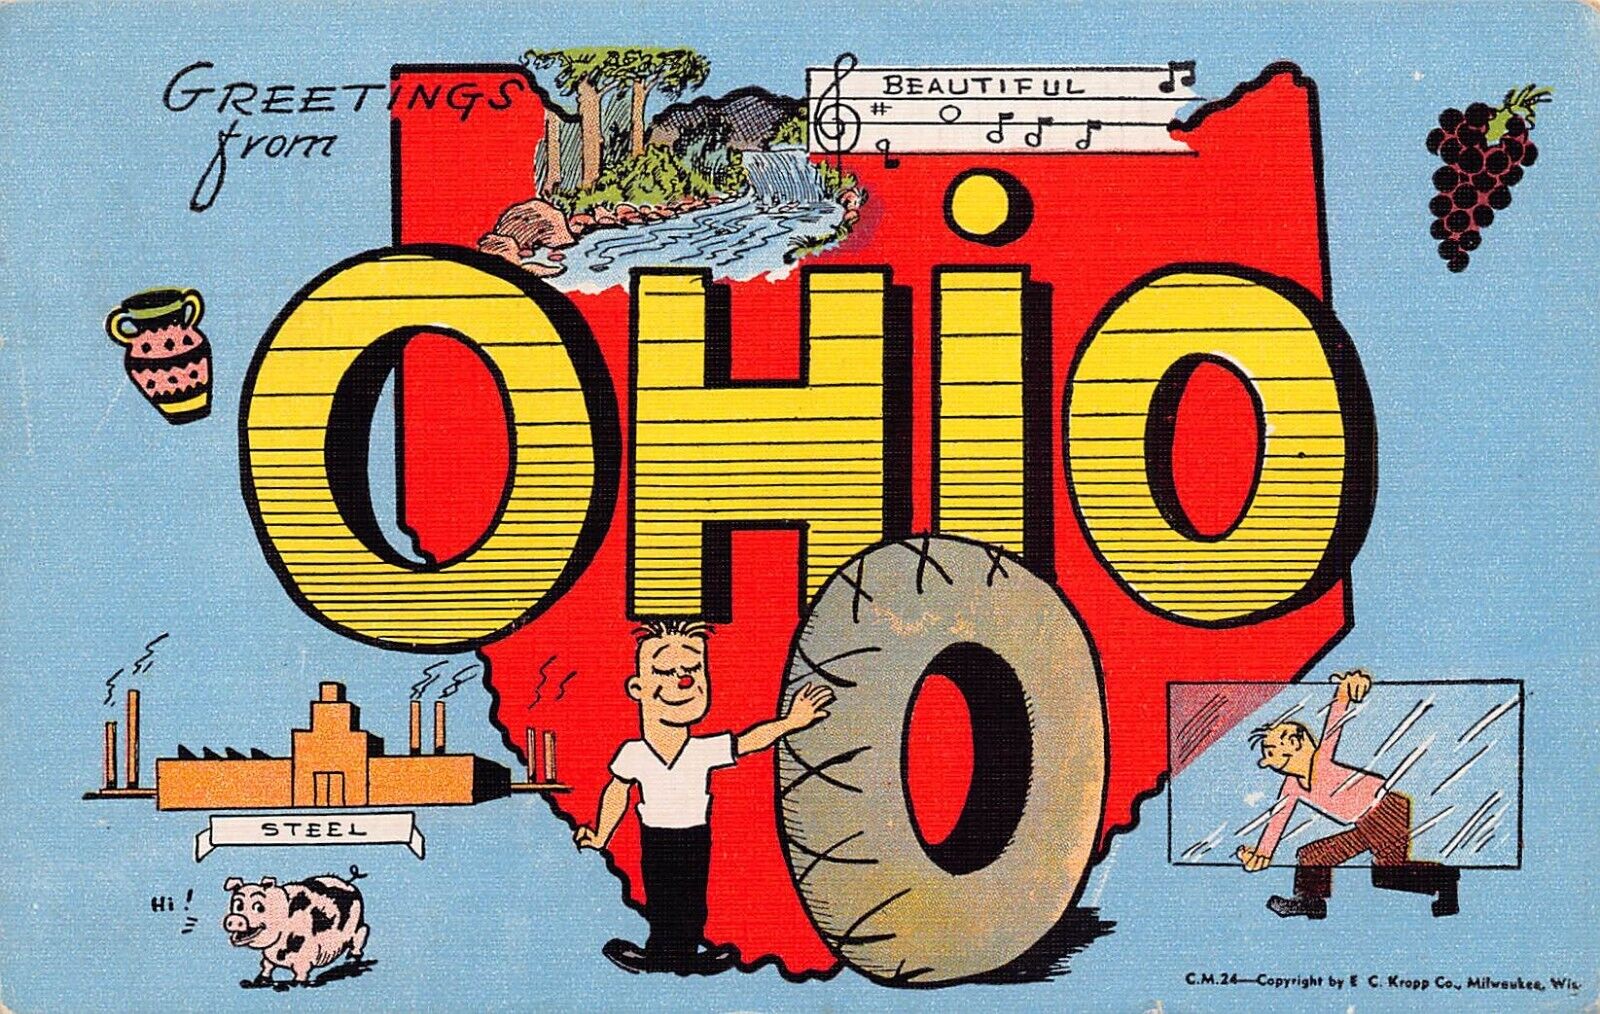 1957 Ohio OH Greetings From Larger Not Large Letter 16373-C.M.24 Linen Postcard